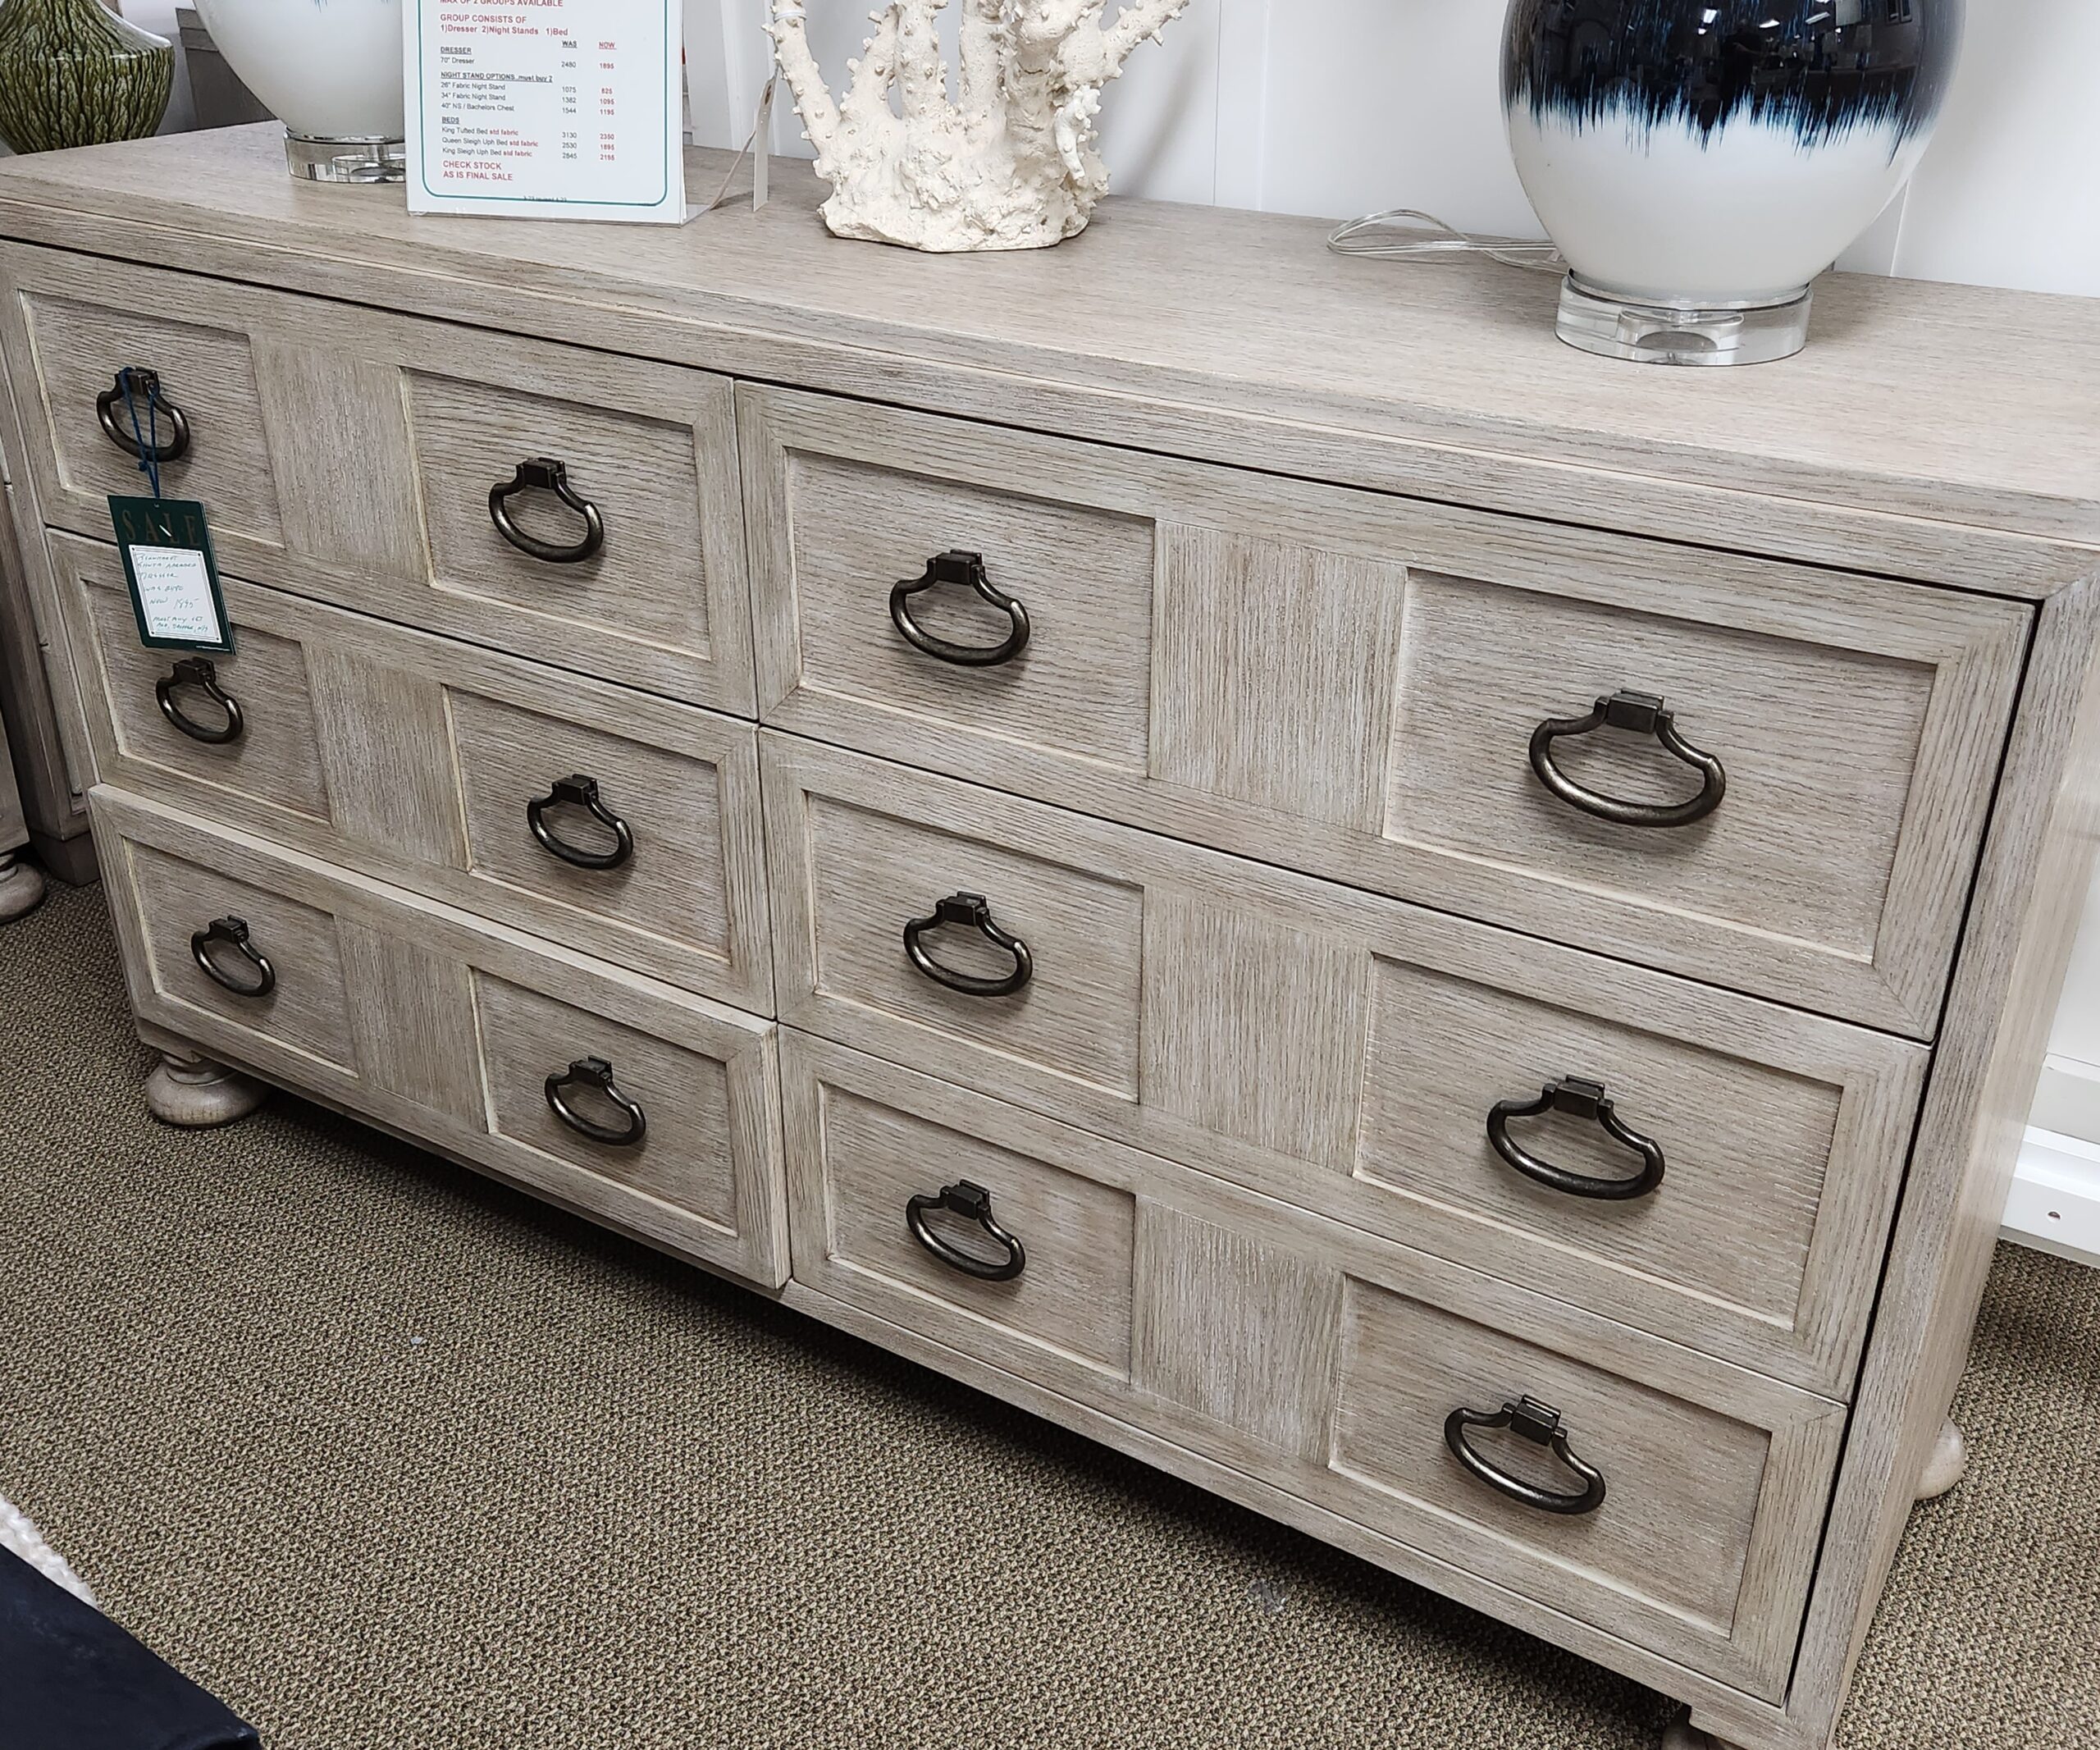 a white dresser with many drawers and knobs